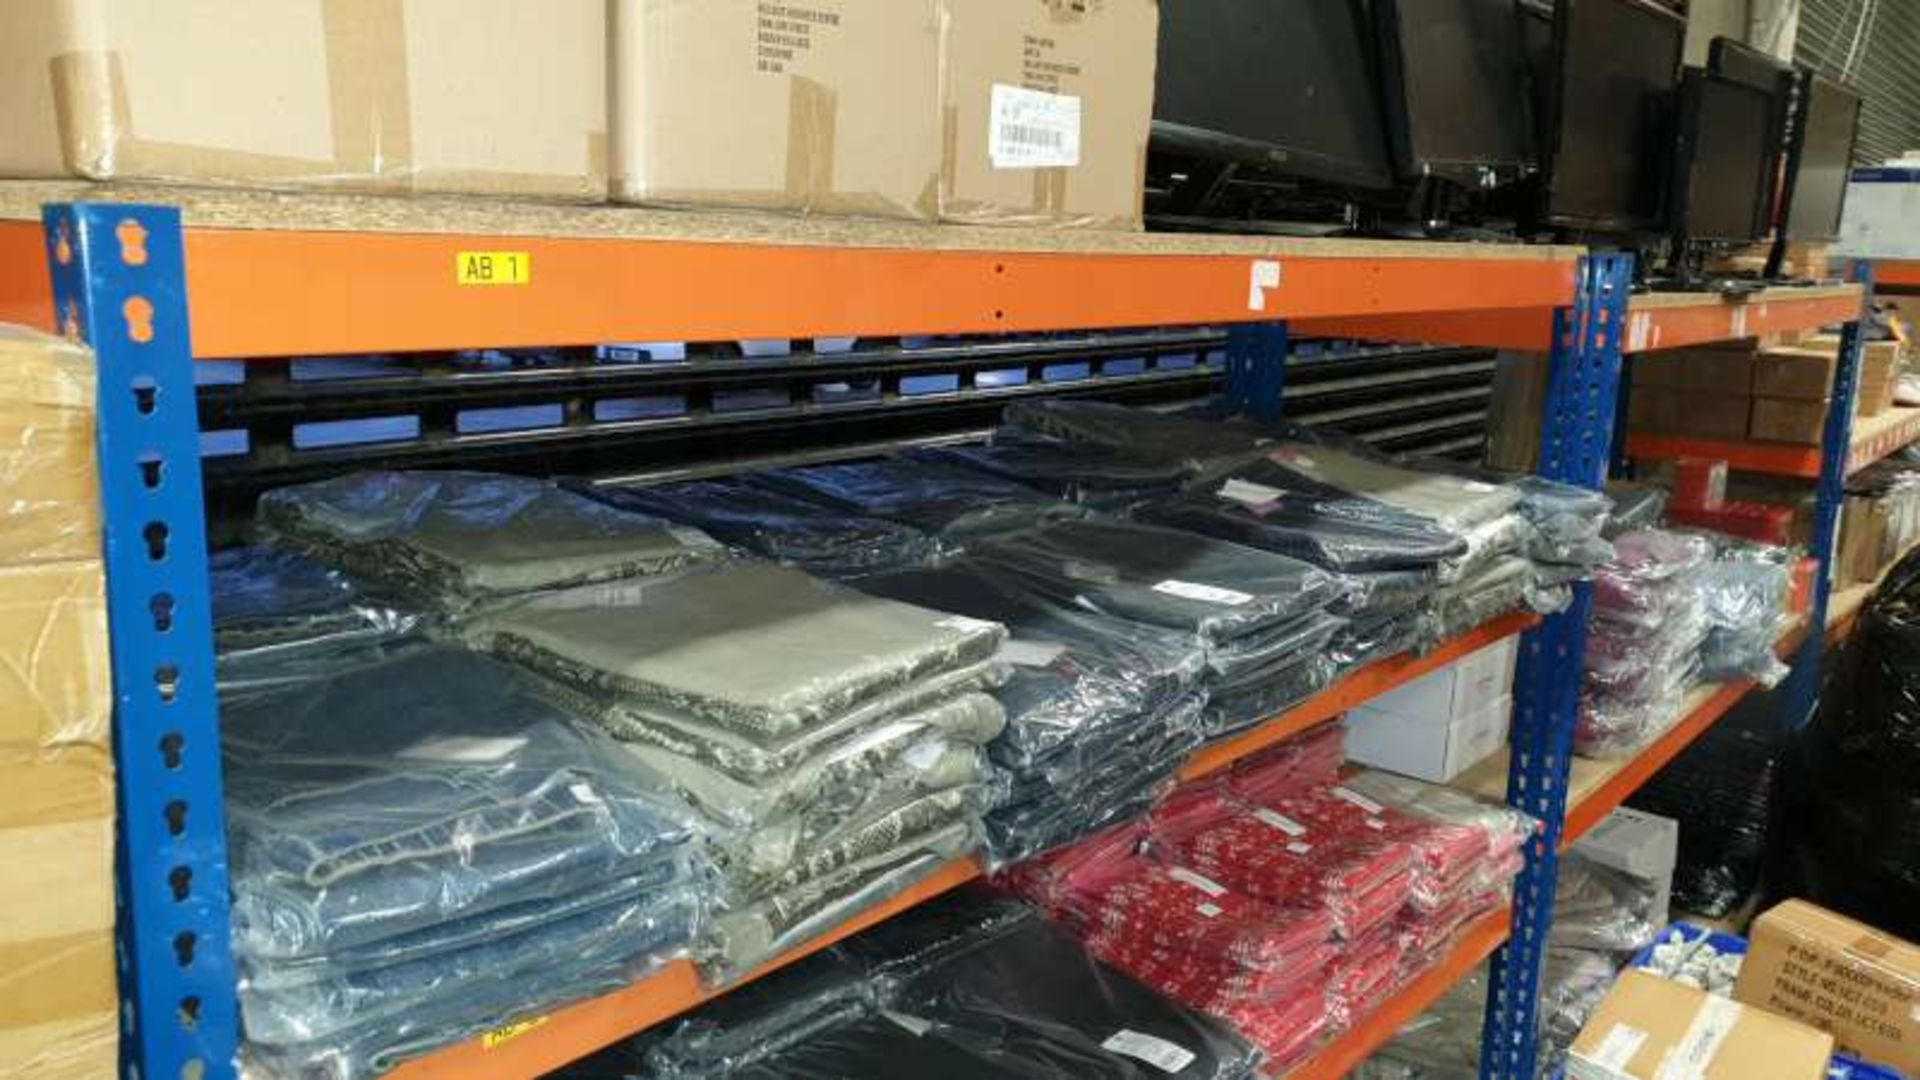 LOT CONTAINING A LARGE QTY OF CLOTHING IN VARIOUS COLOURS / STYLES / SIZES